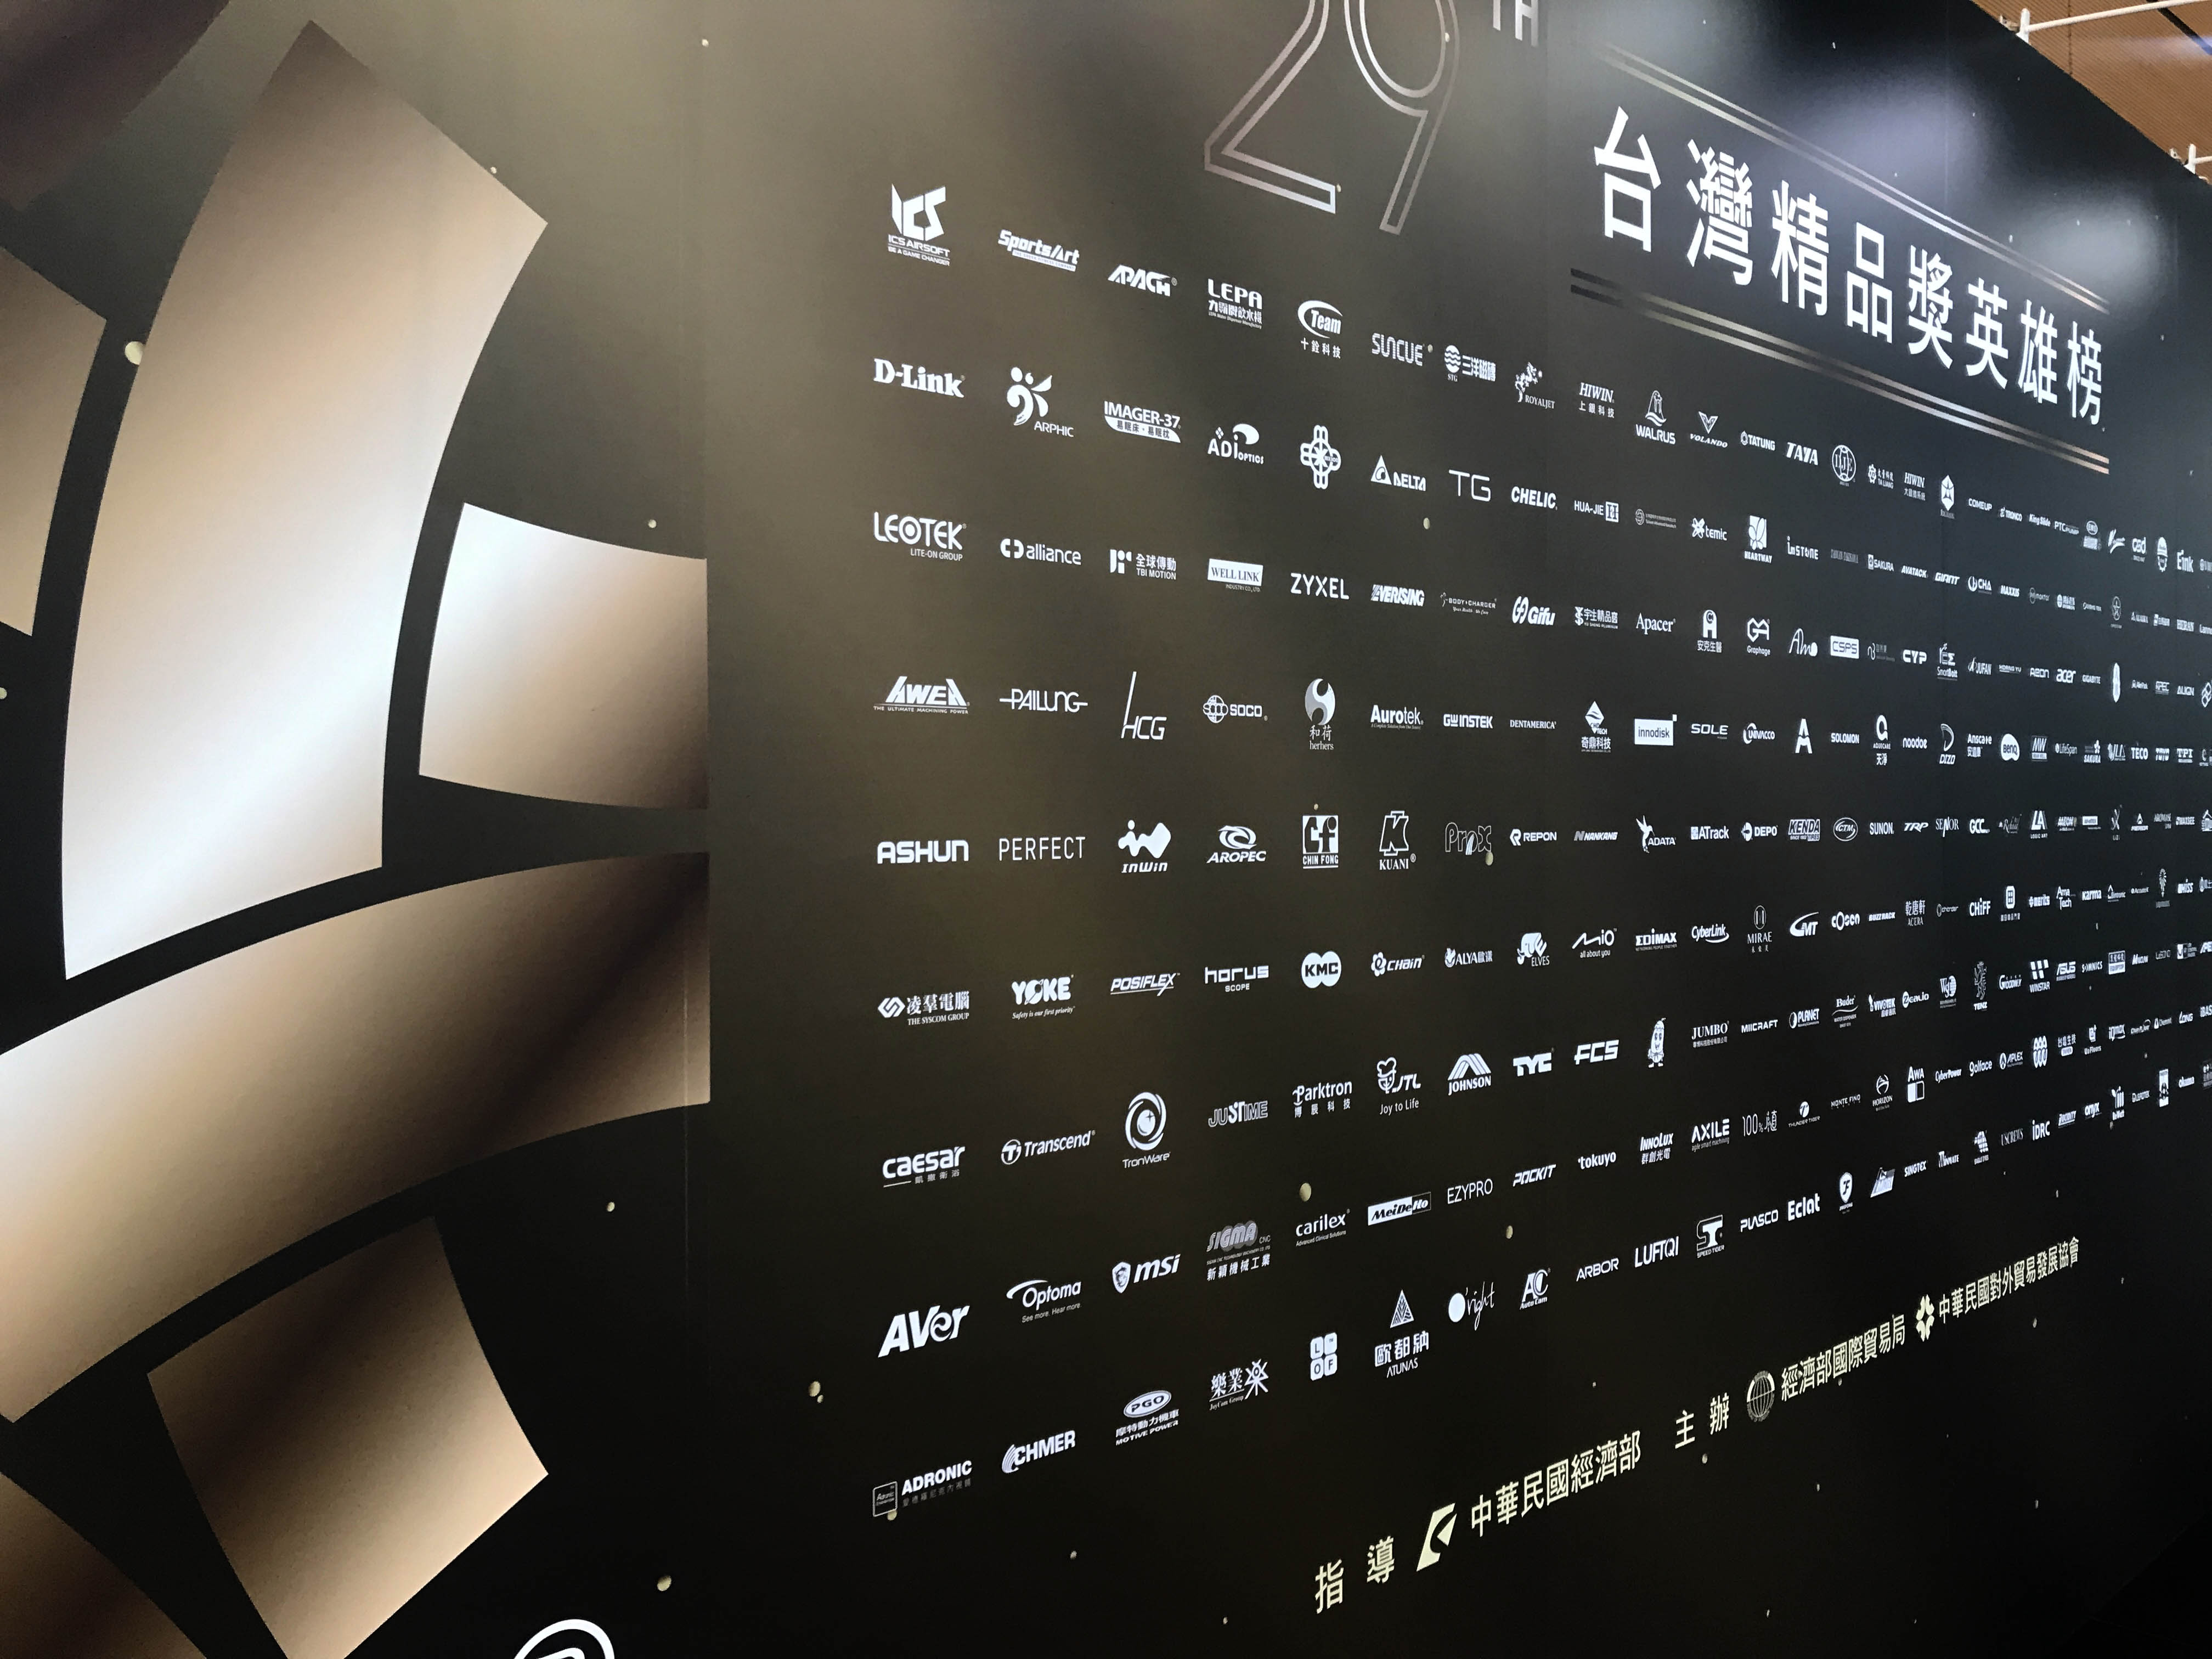 Electric Shutters 2 receives the "Symbol of Excellence, Taiwan"